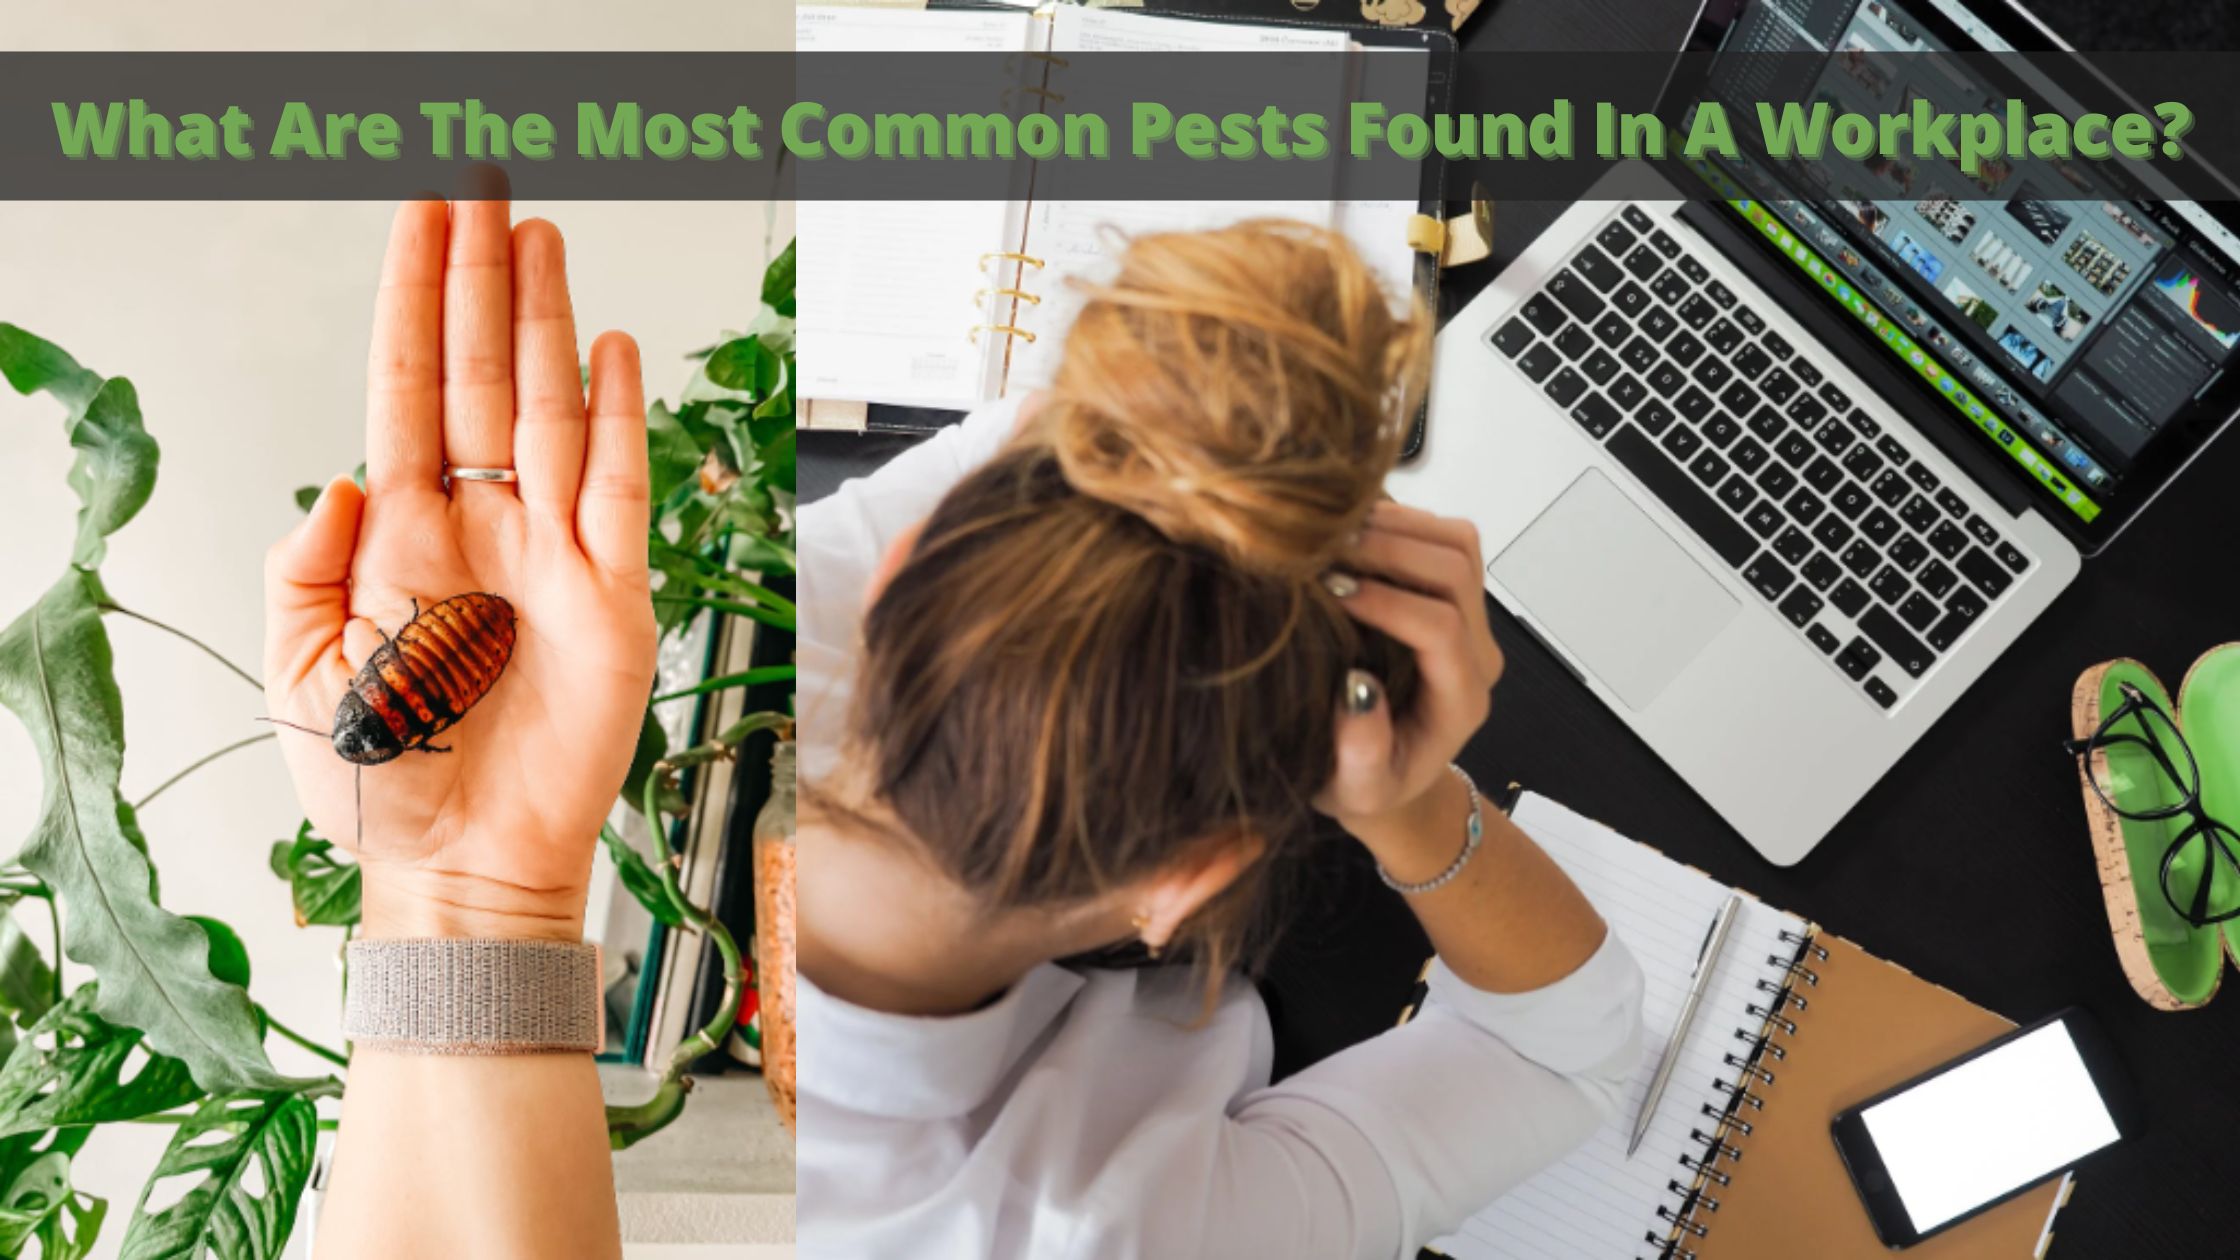 What Are The Most Common Pests Found In A Workplace